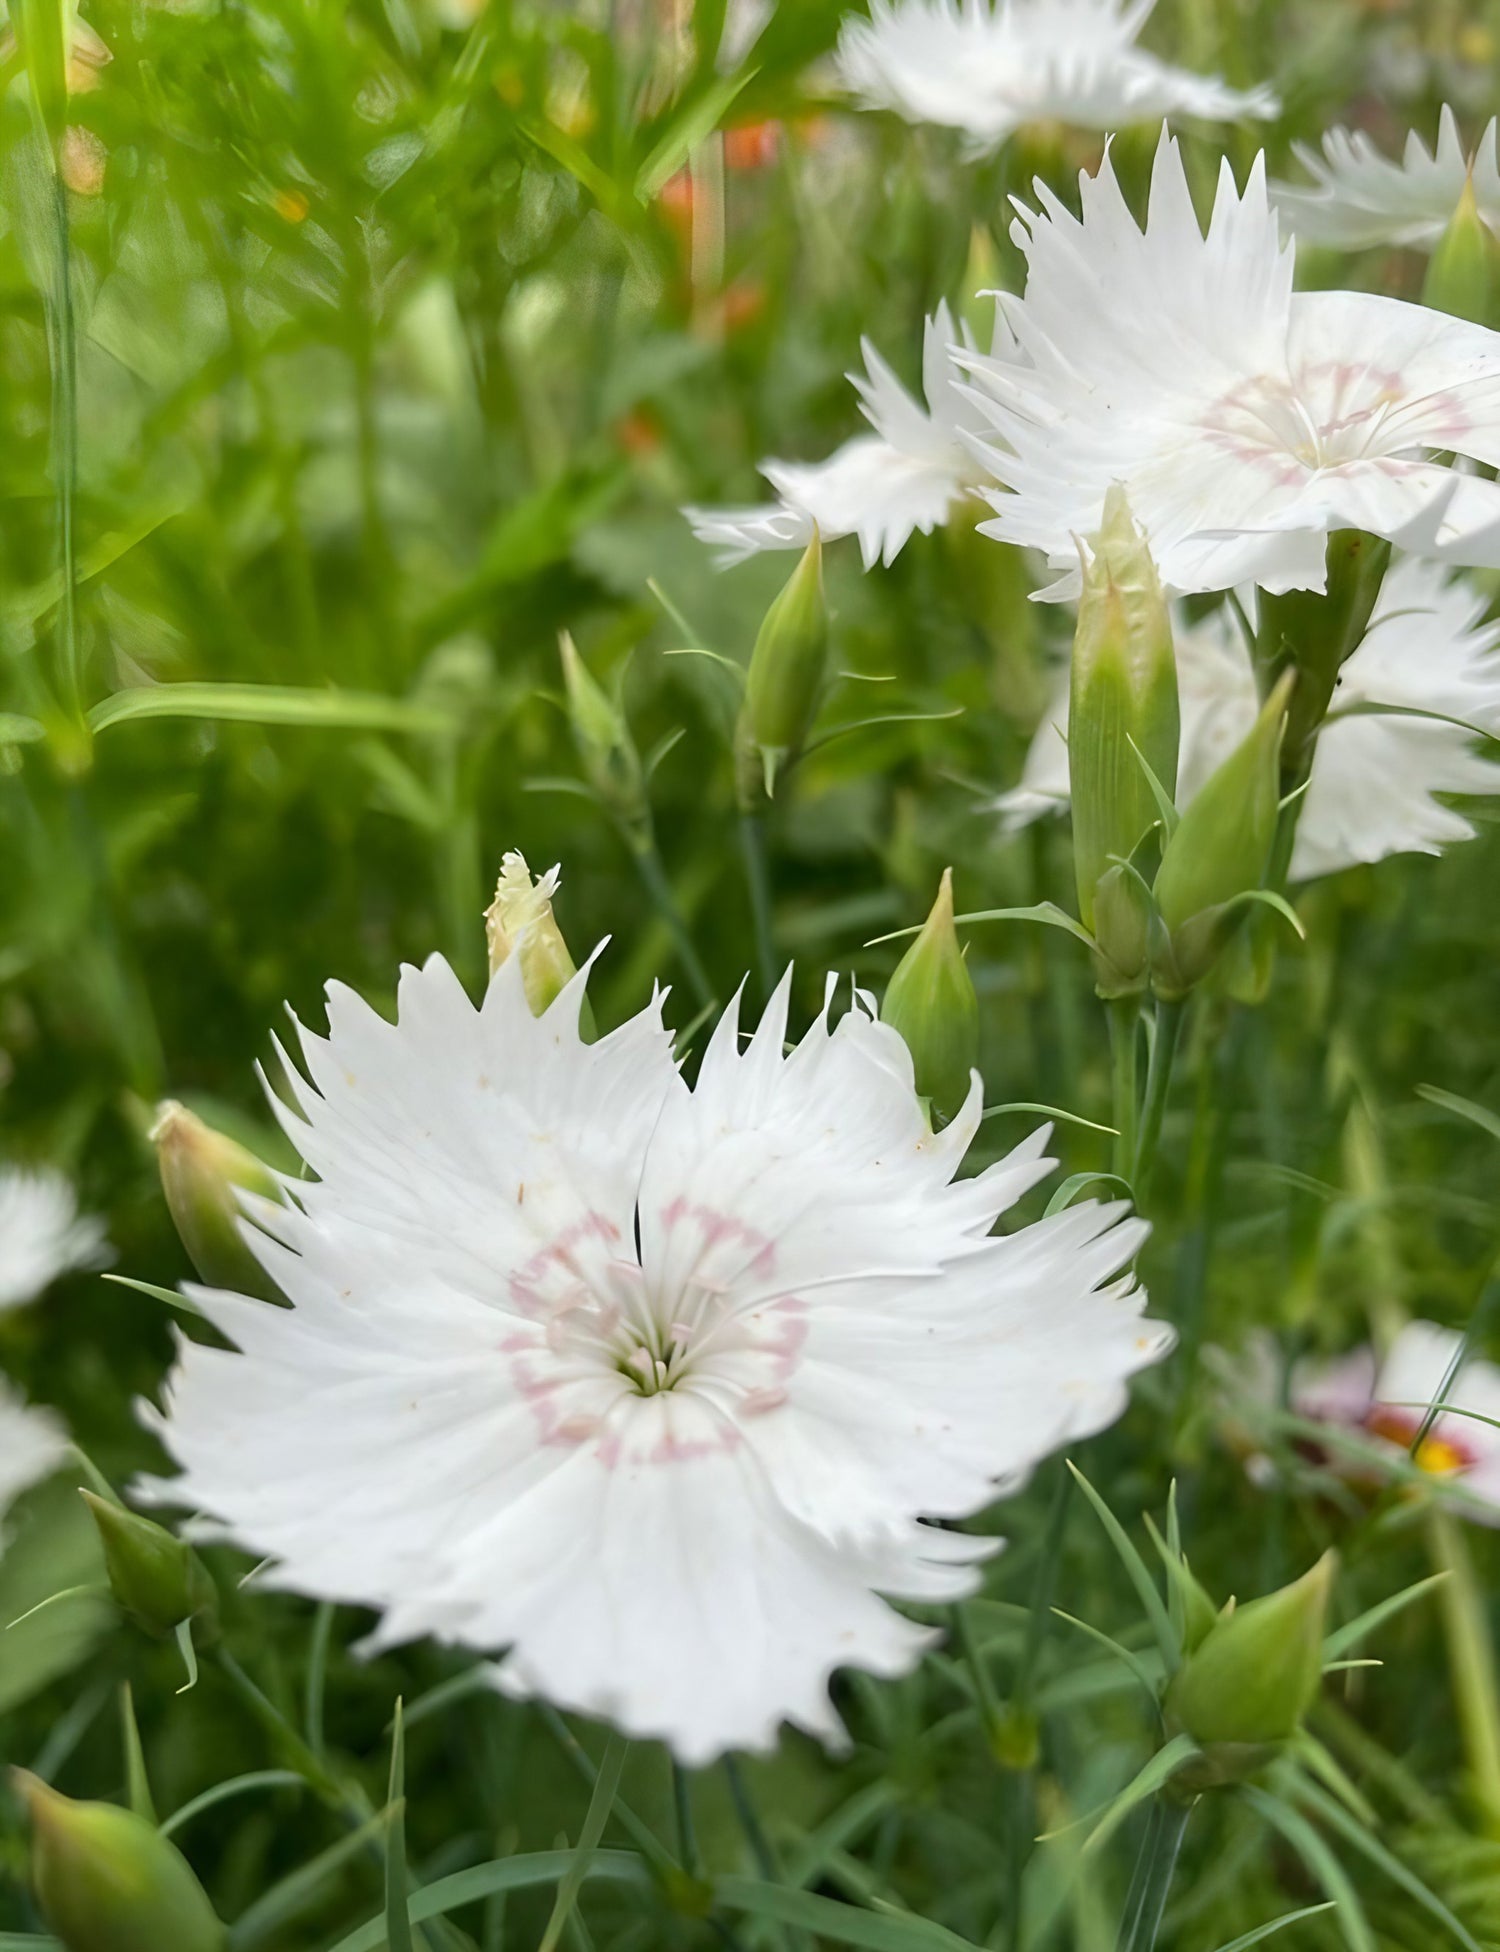 Dianthus Heddewegii Gaiety Single Mix with white petals among green foliage